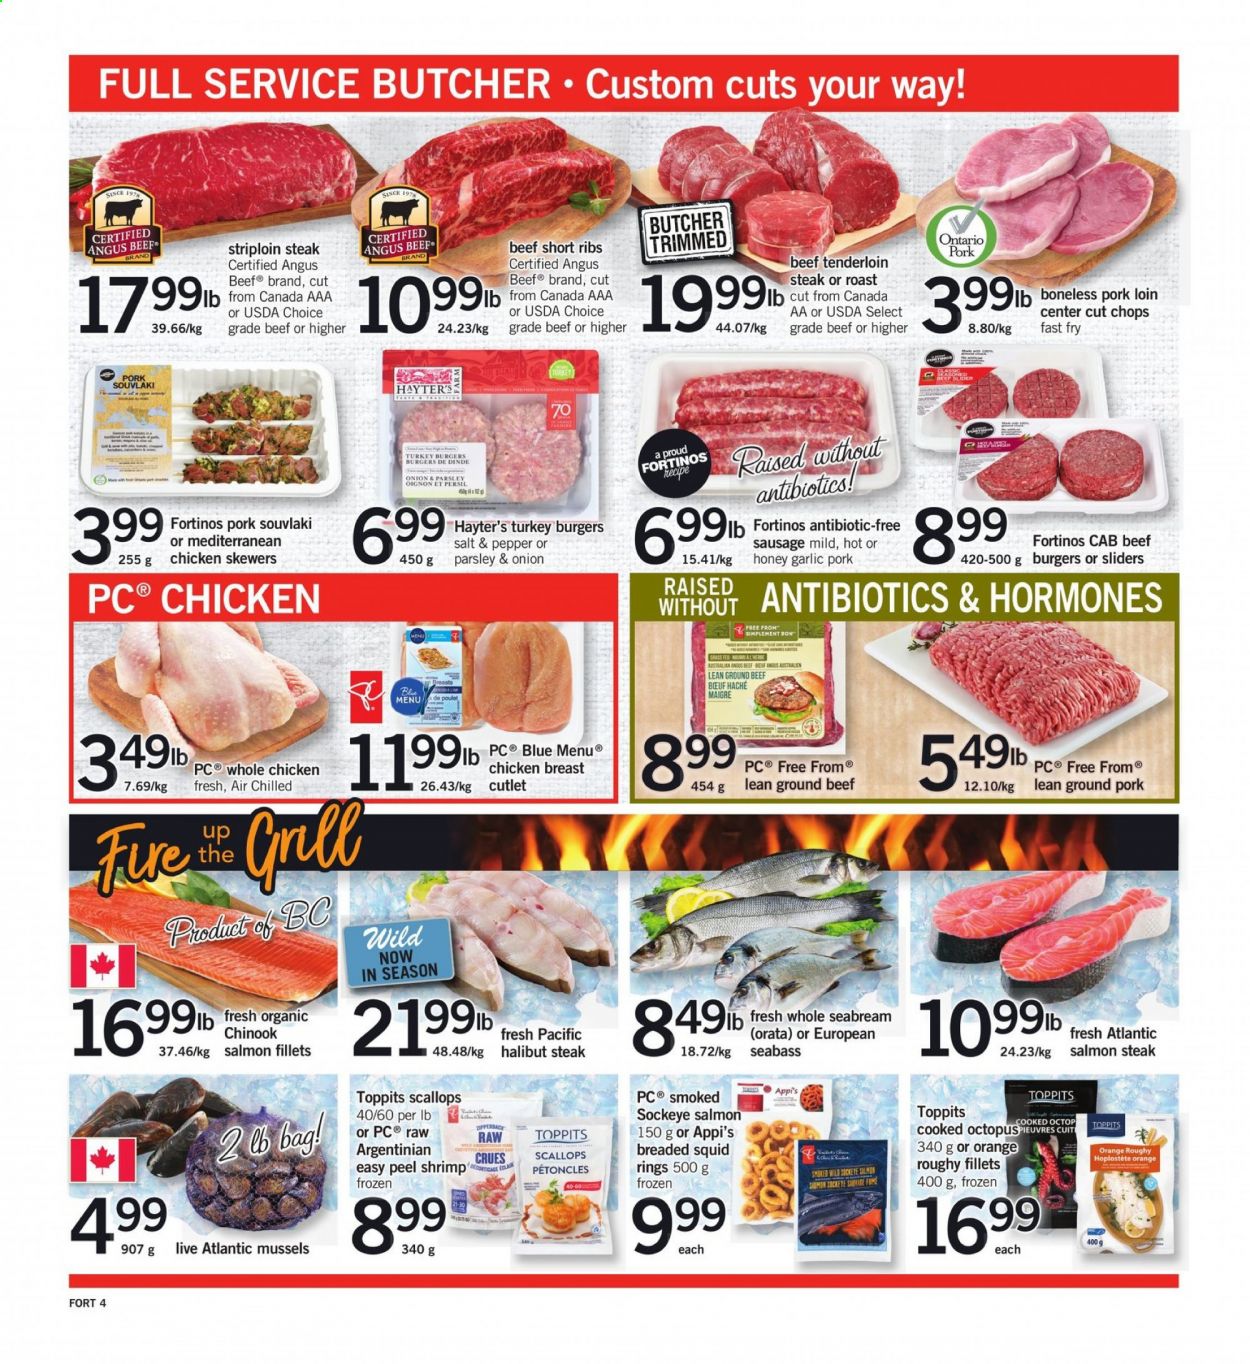 thumbnail - Fortinos Flyer - April 15, 2021 - April 21, 2021 - Sales products - garlic, parsley, mussels, salmon, salmon fillet, scallops, sea bass, squid, halibut, octopus, seabream, shrimps, squid rings, hamburger, sausage, whole chicken, chicken, beef meat, beef ribs, ground beef, beef tenderloin, striploin steak, ground pork, turkey burger, pork loin, pork meat, Persil, grill, steak. Page 4.